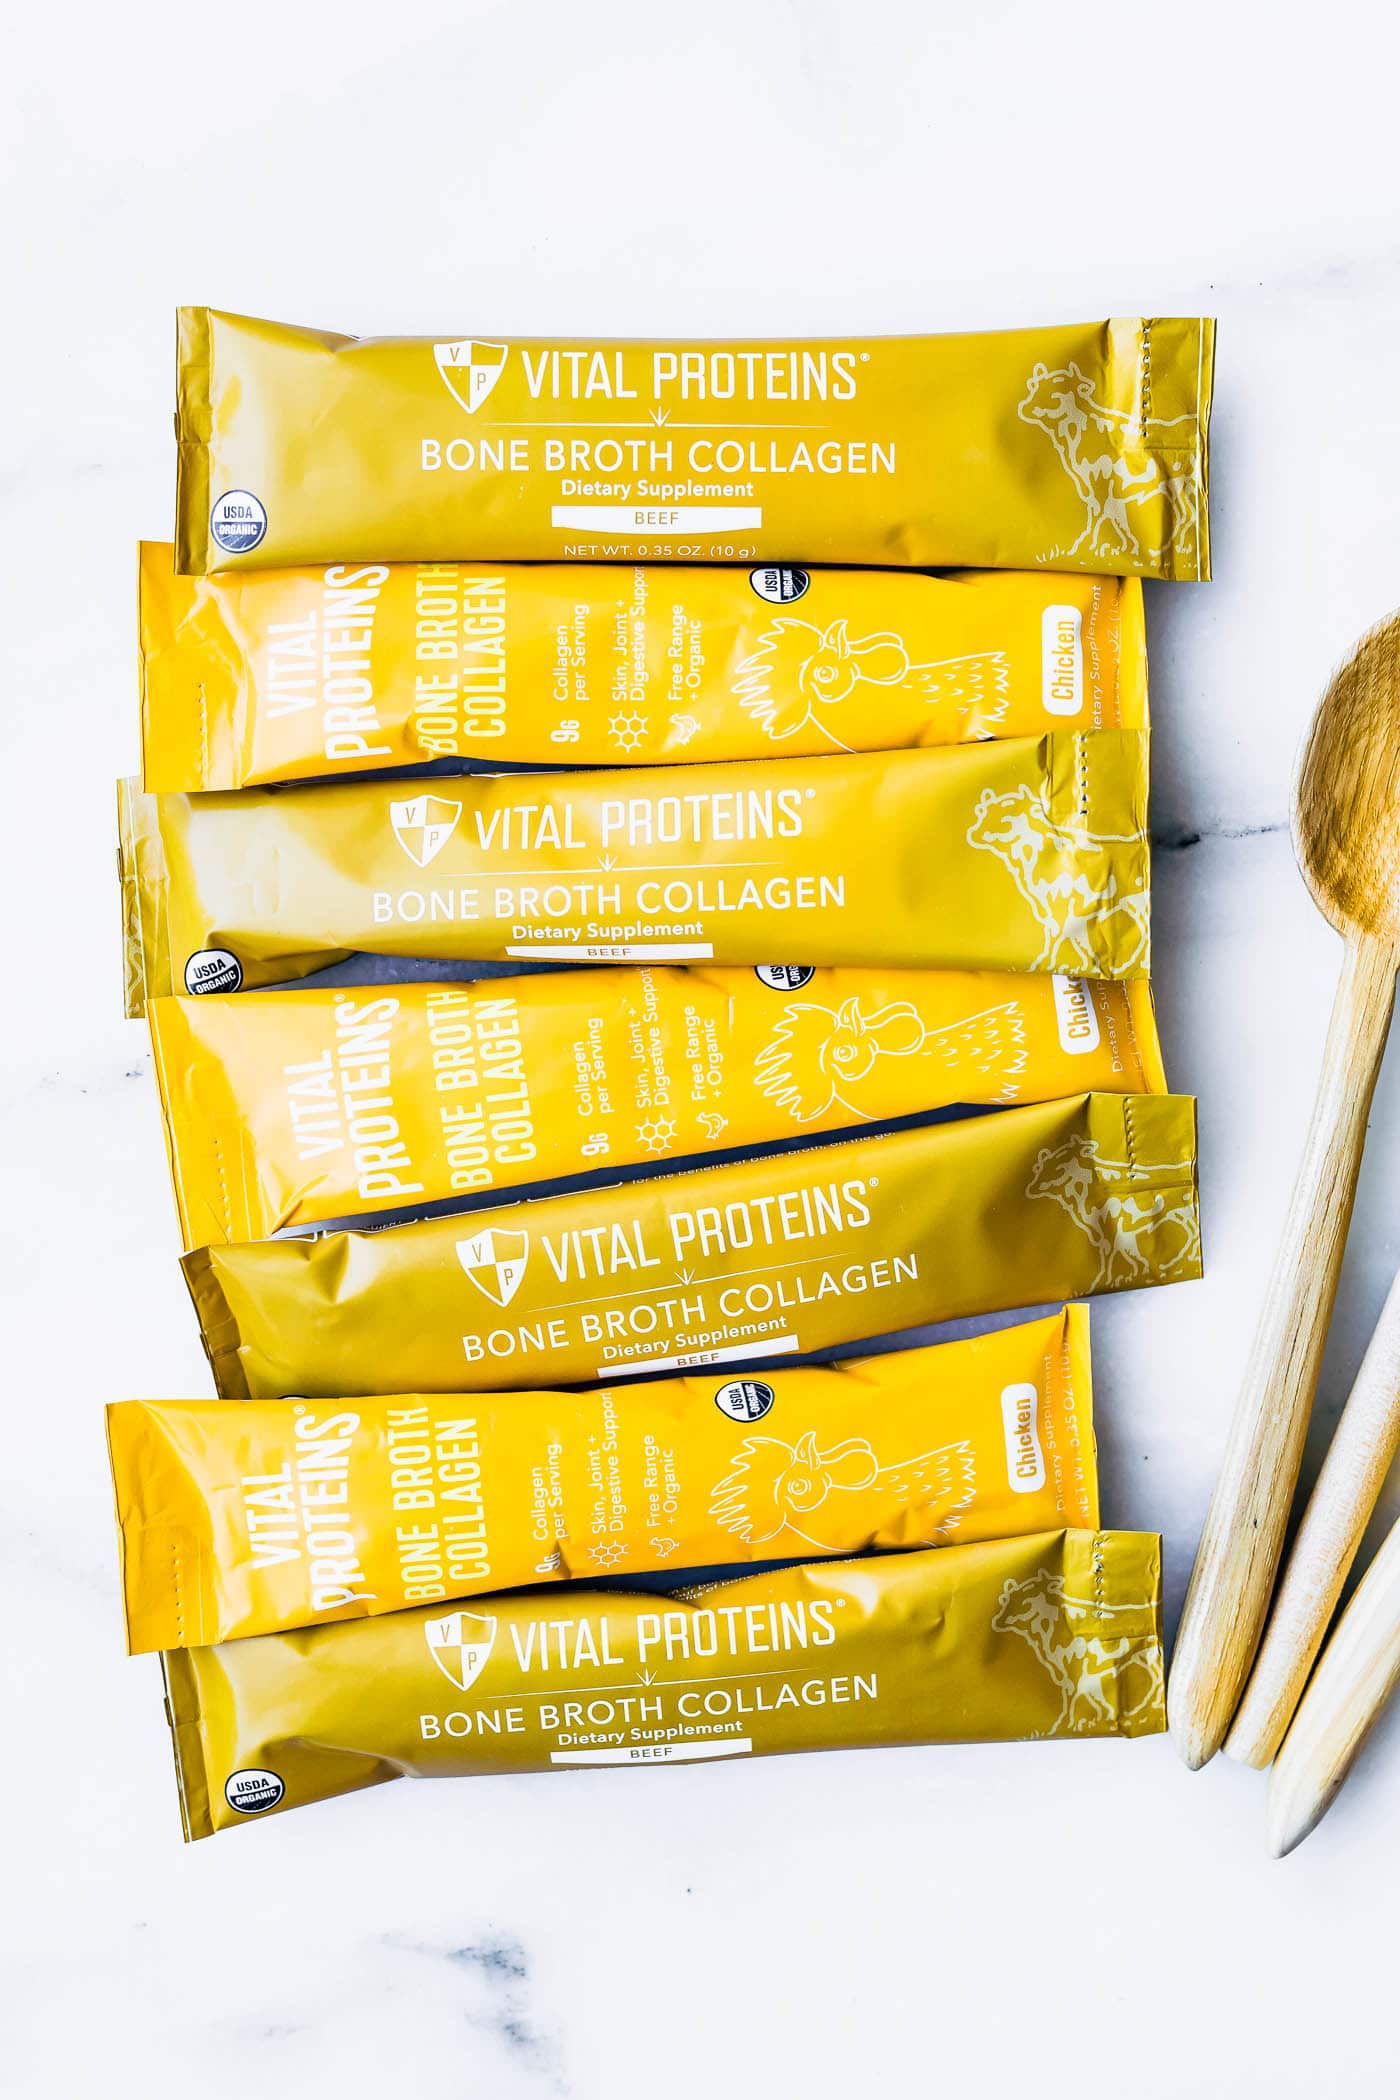 Several packets of Vital Proteins bone broth collagen lined up on a counter.